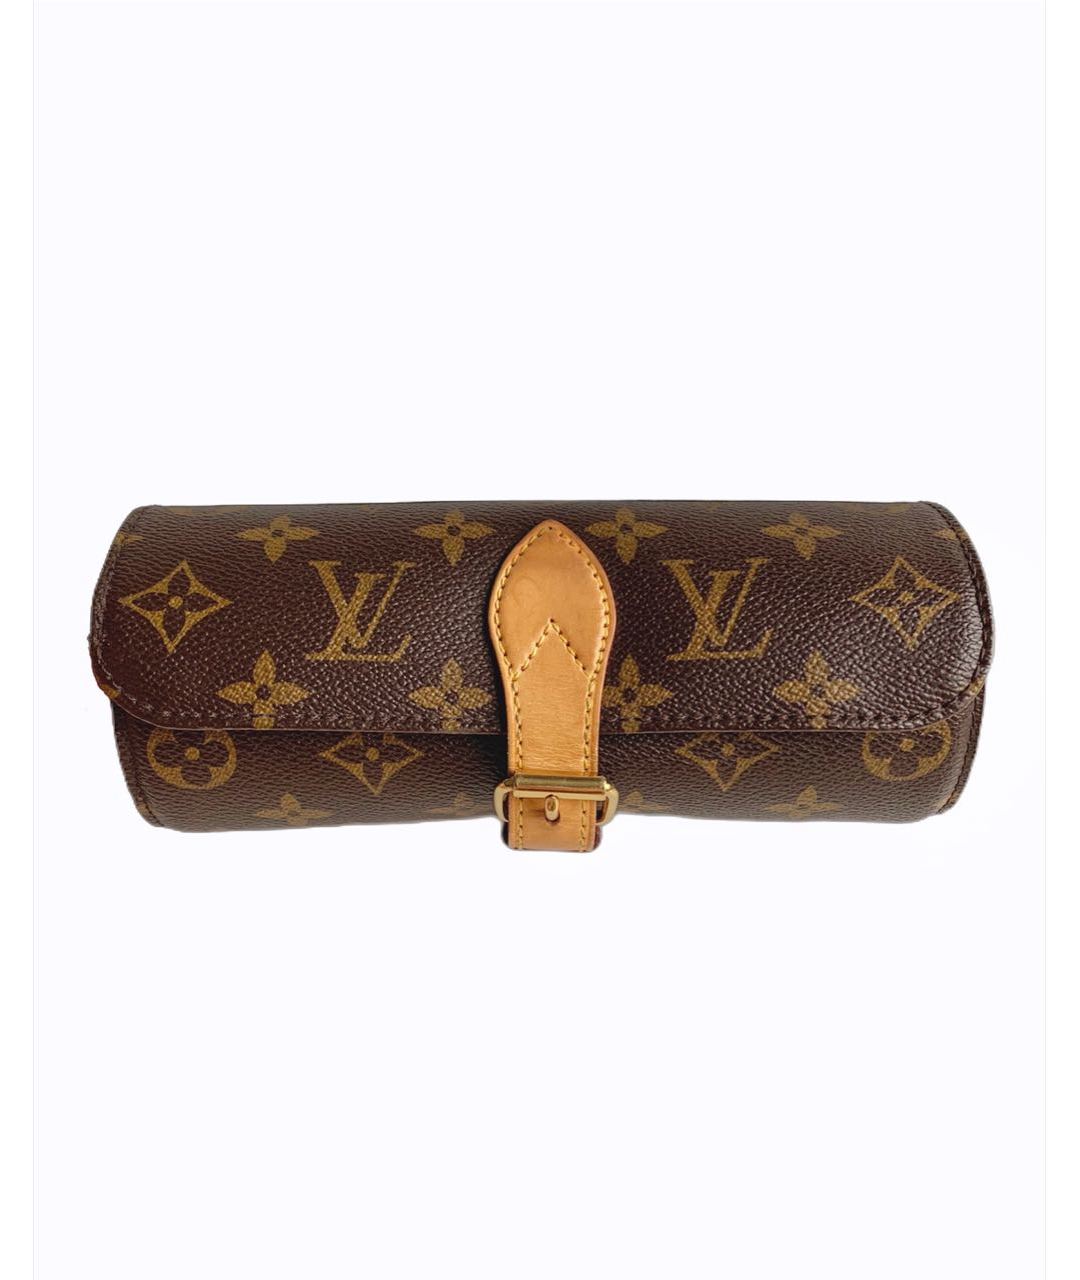 LOUIS VUITTON PRE-OWNED Коричневая косметичка, фото 1